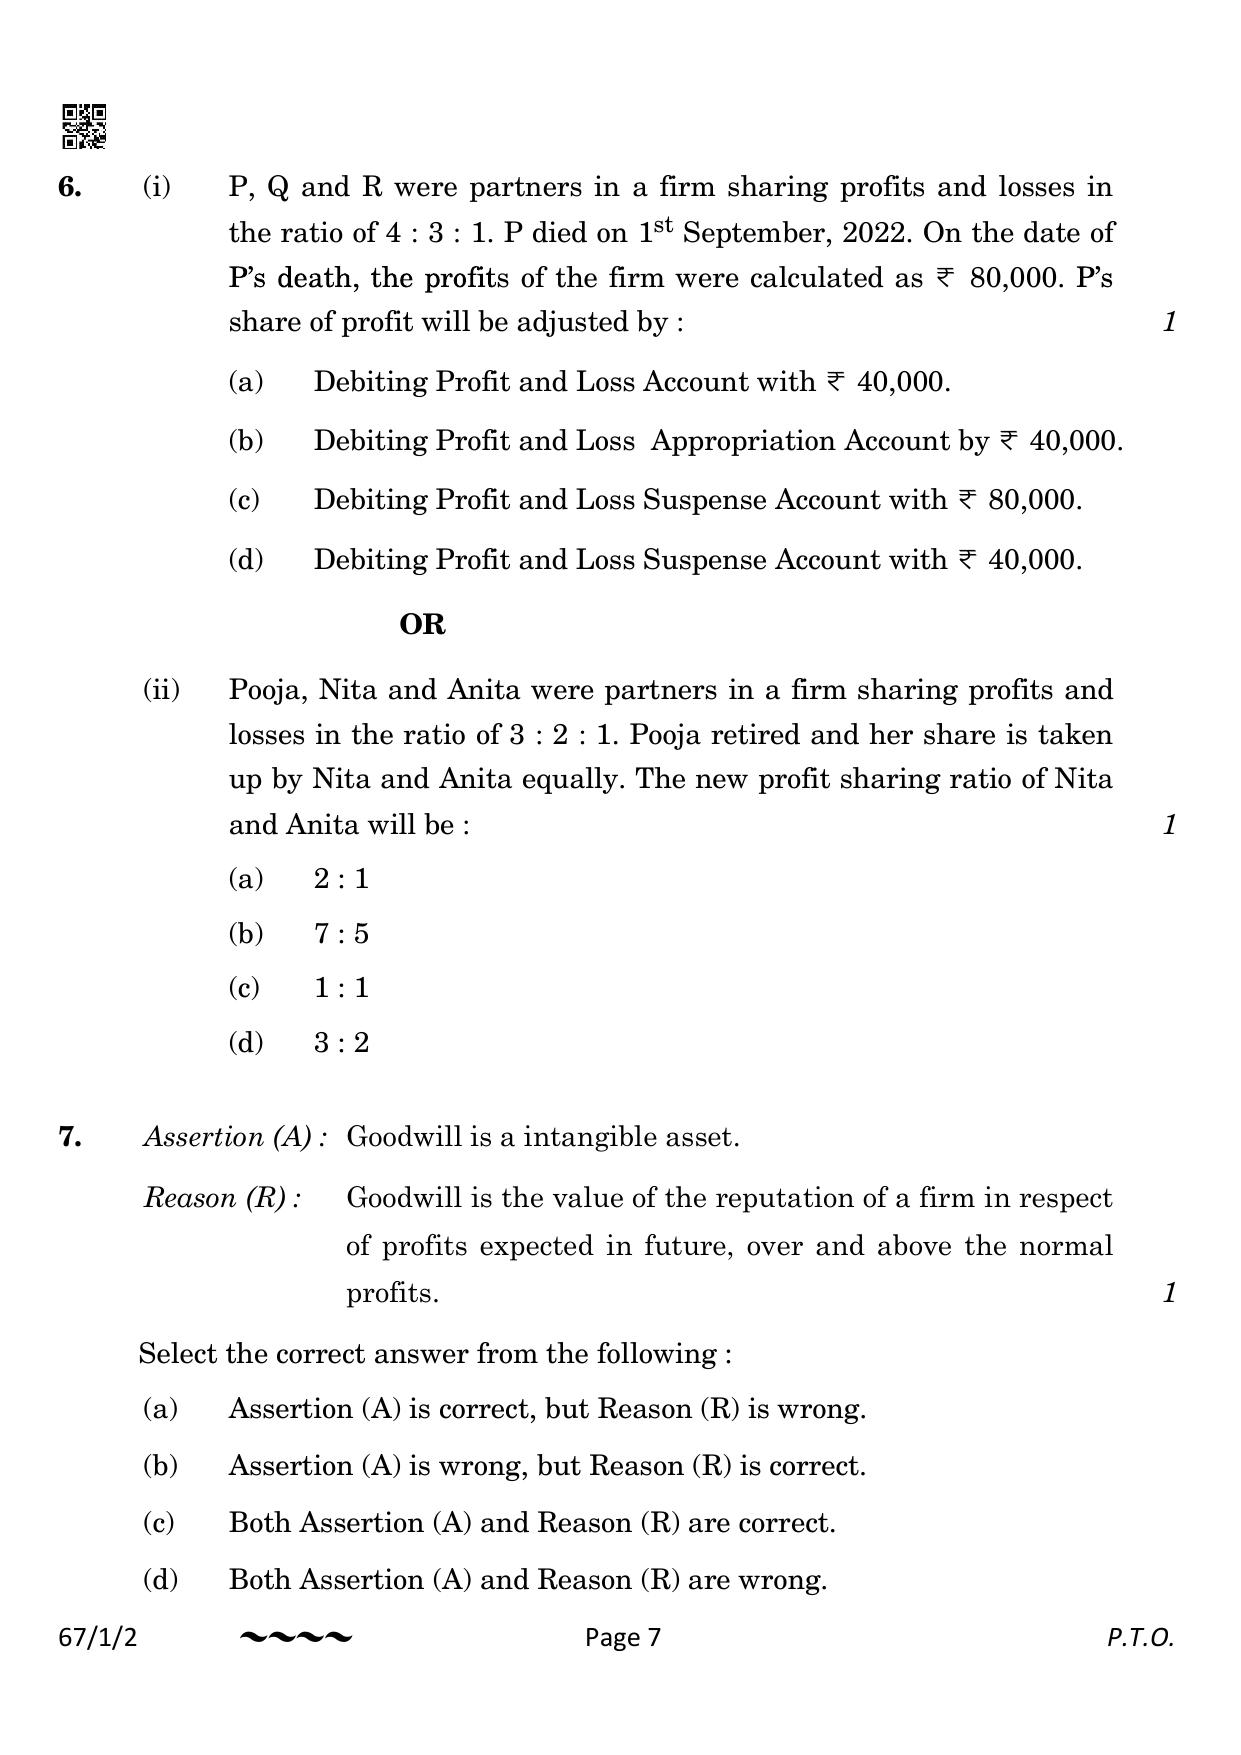 CBSE Class 12 67-1-2 Accountancy 2023 Question Paper - Page 7